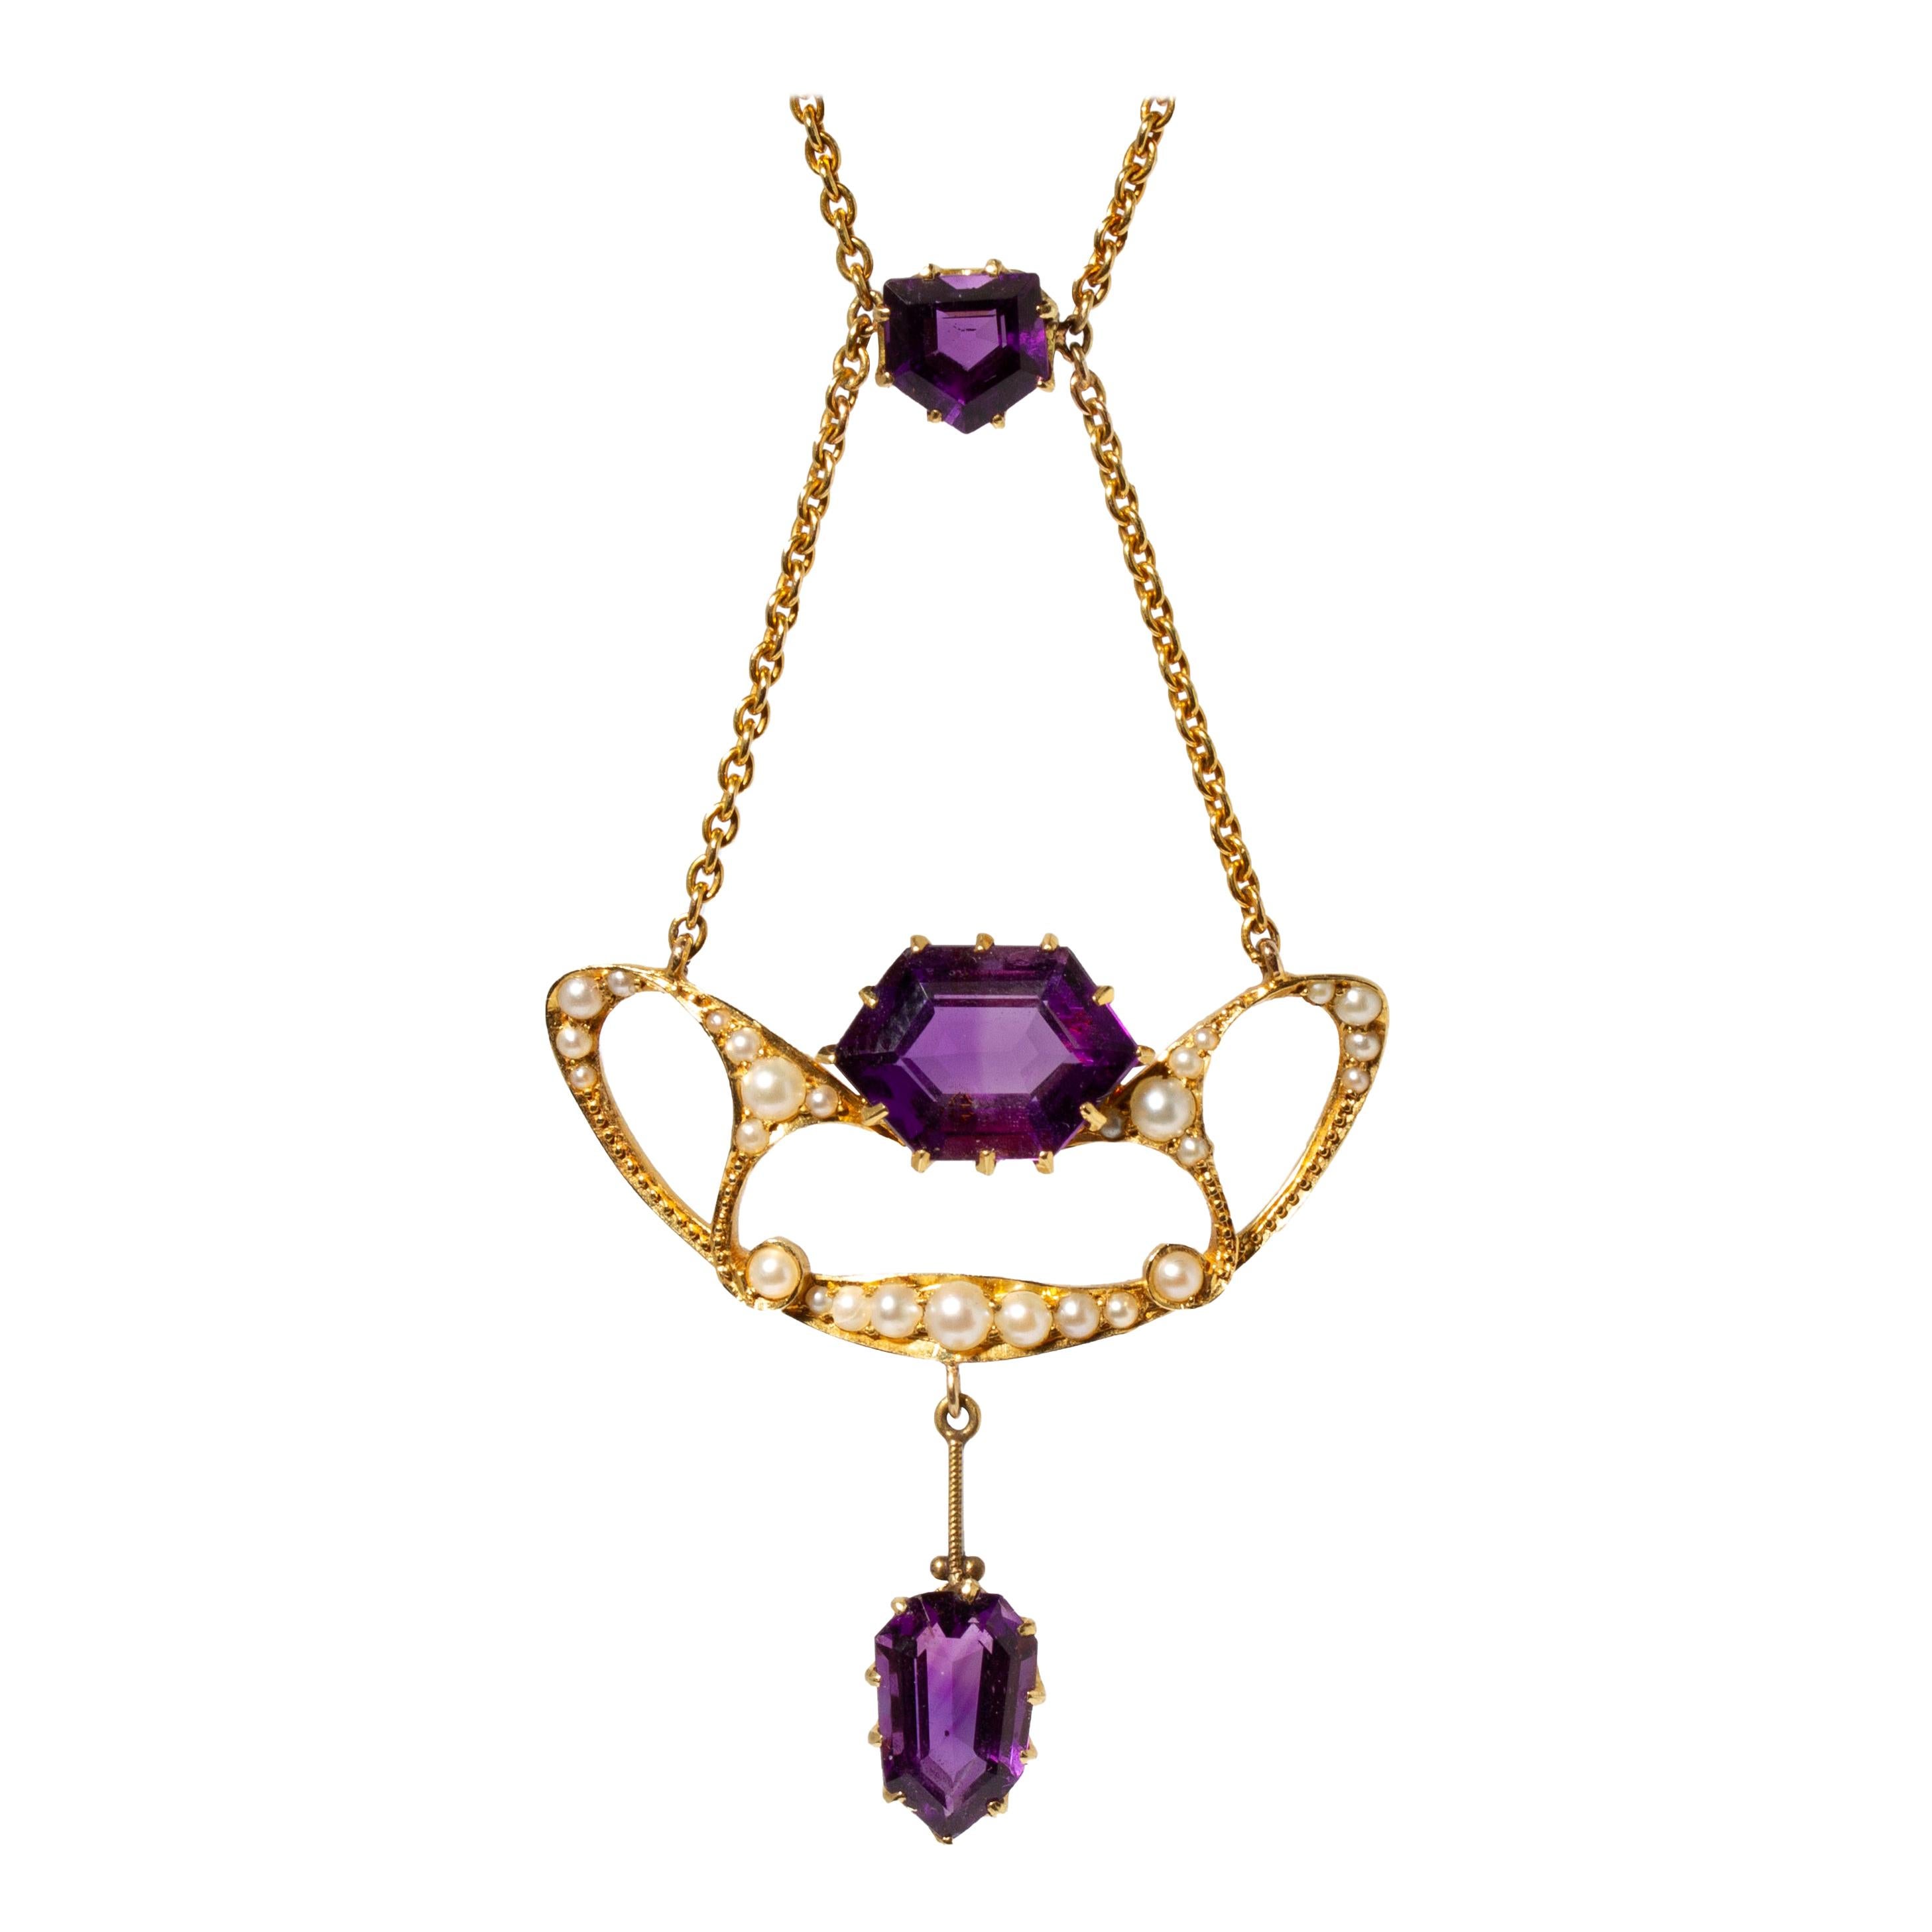 Ollivant & Botsford 18k Amethyst Seed Pearl Necklace